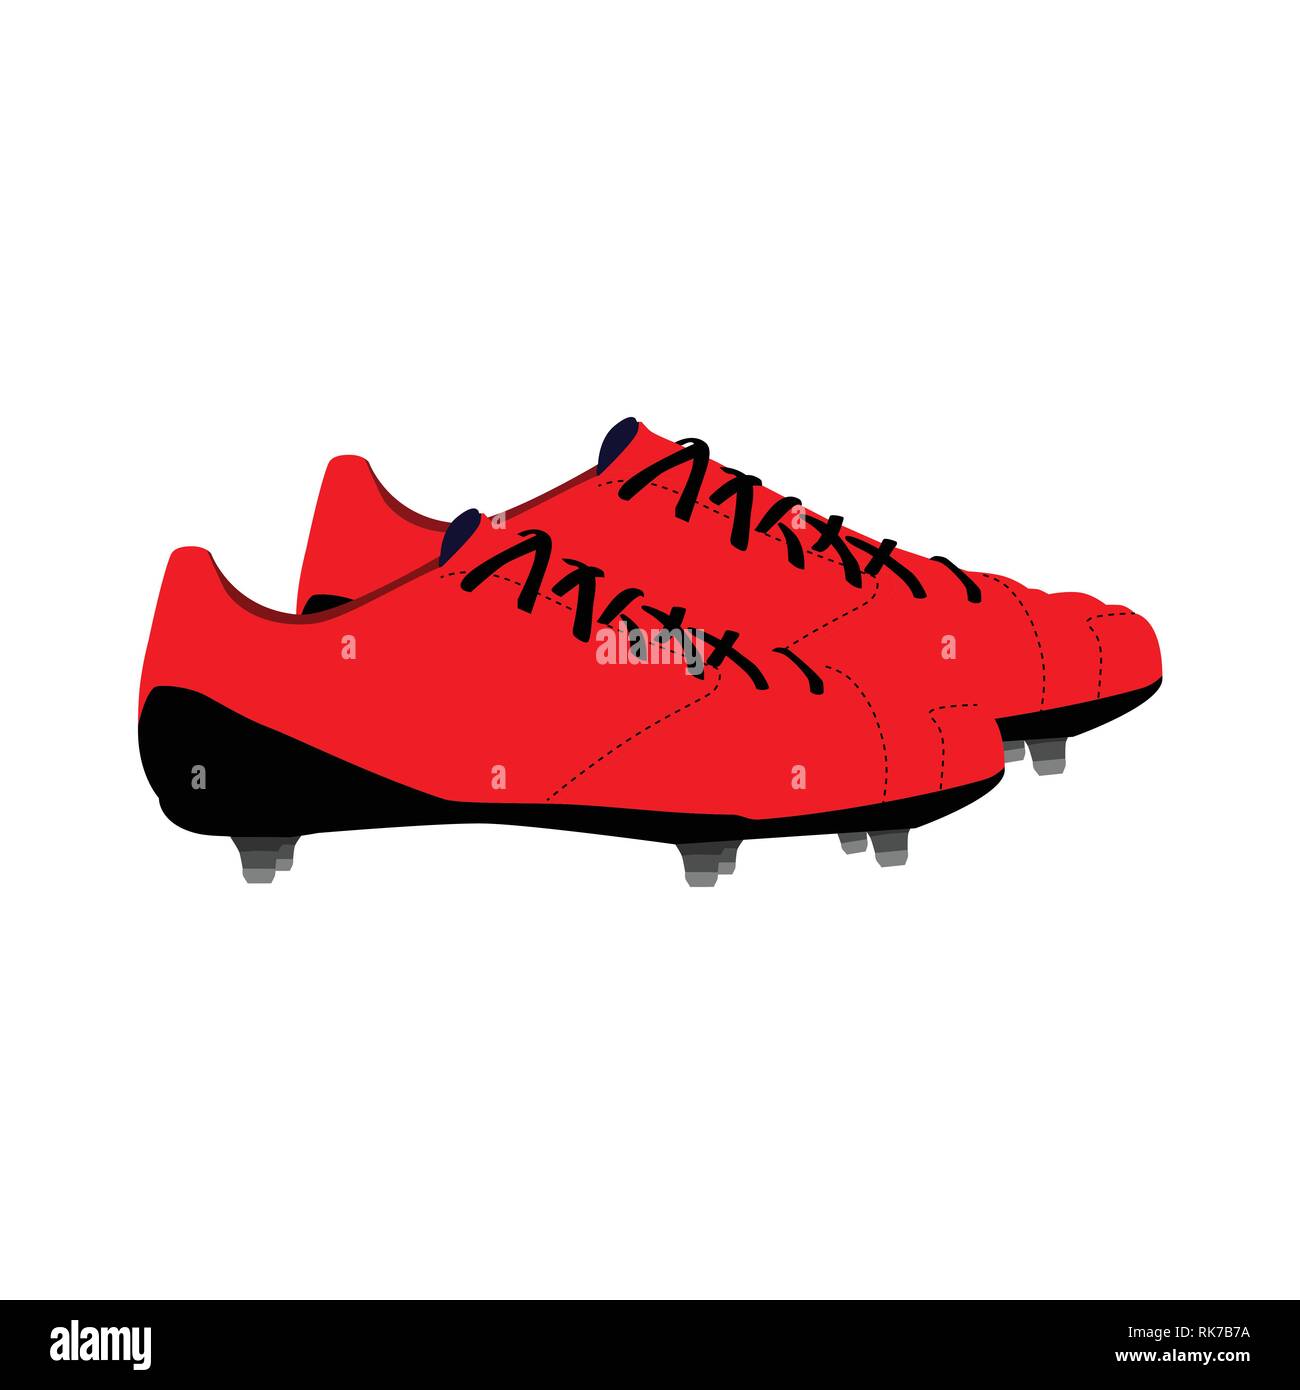 Football Shoes Soccer Illustration Vector Graphic Design Stock Vector ...